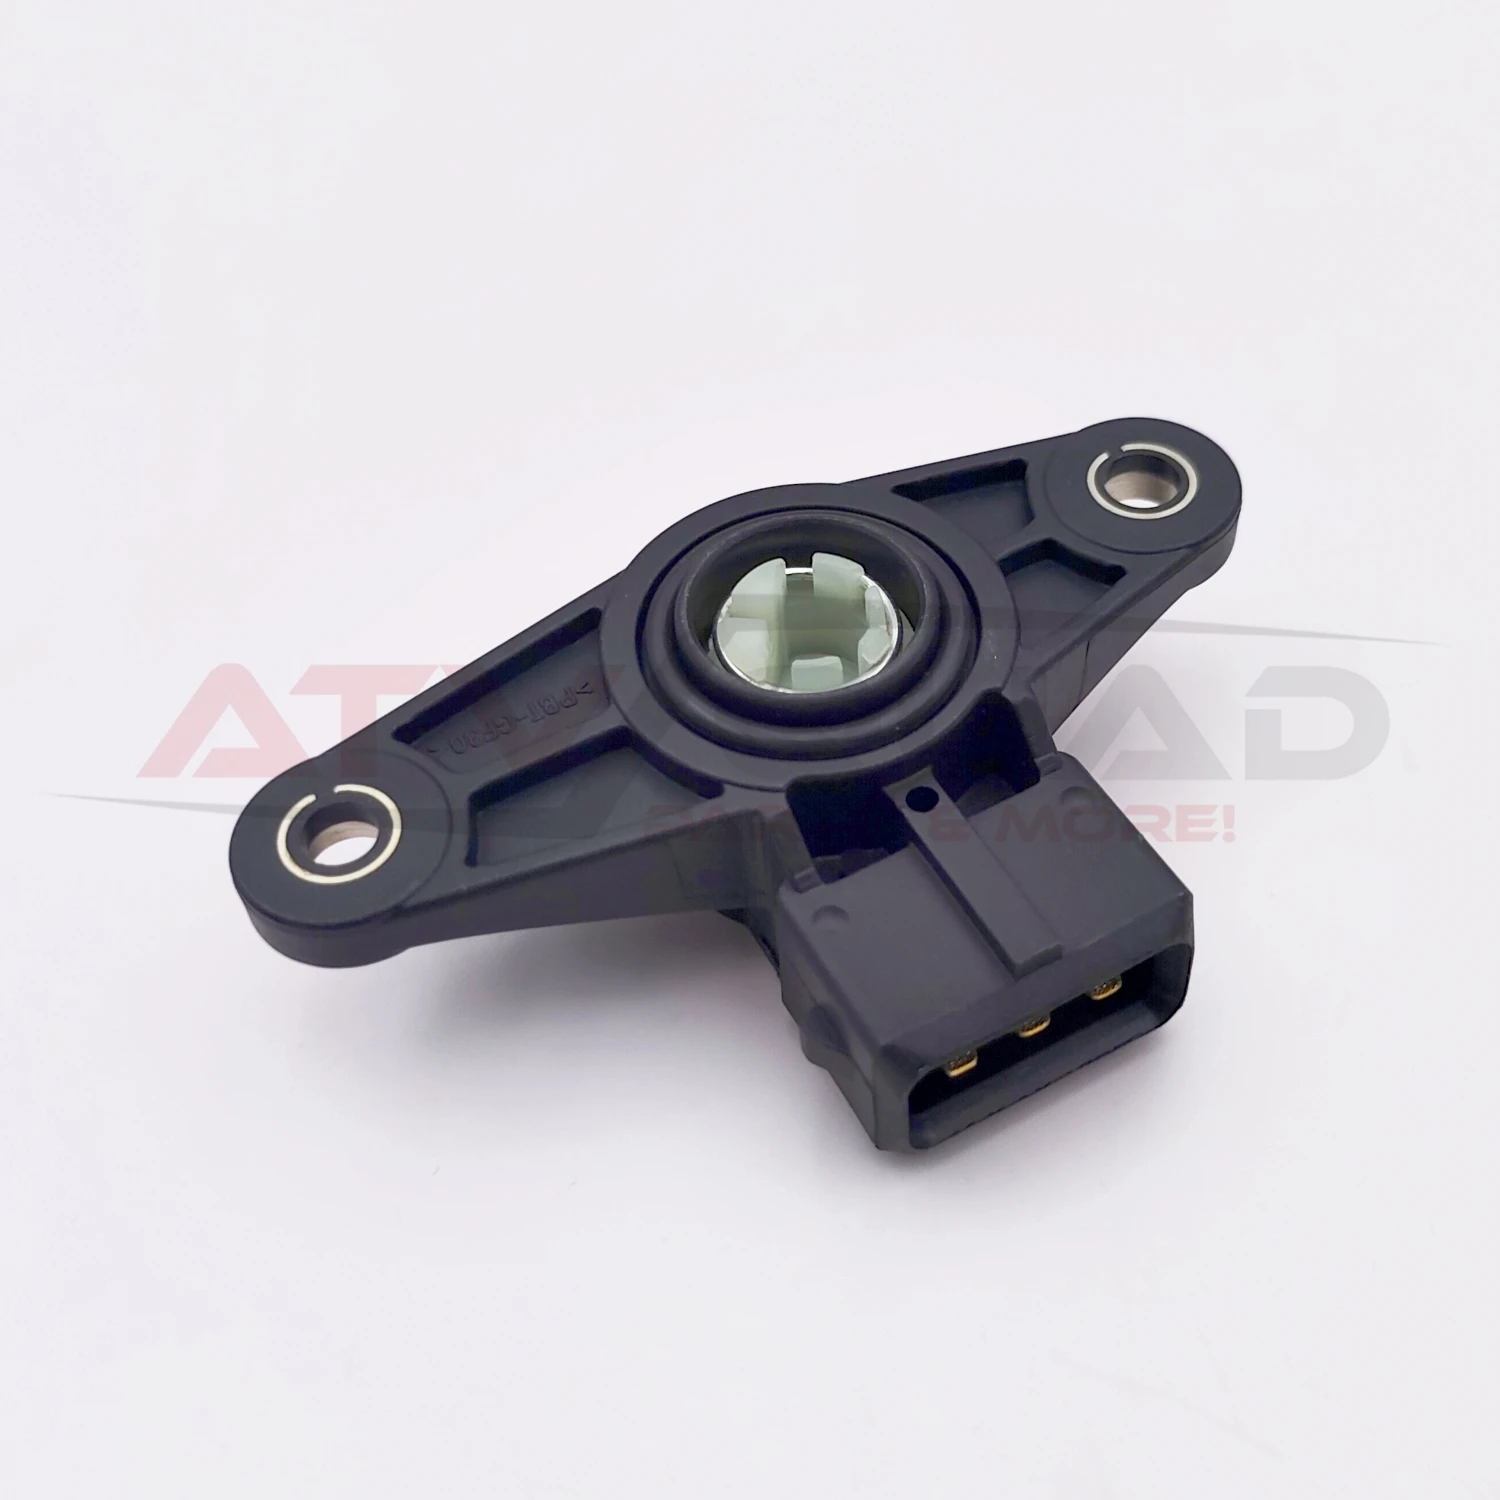 TPS Throttle Position Sensor for CFmoto 400NK 650NK 650MT 650GT Motorcycle 400 450 500S 520 600 Touring 625 ATV motorcycle throttle position three in one sensor tps 2ph e3750 00 for mio m3 i 125